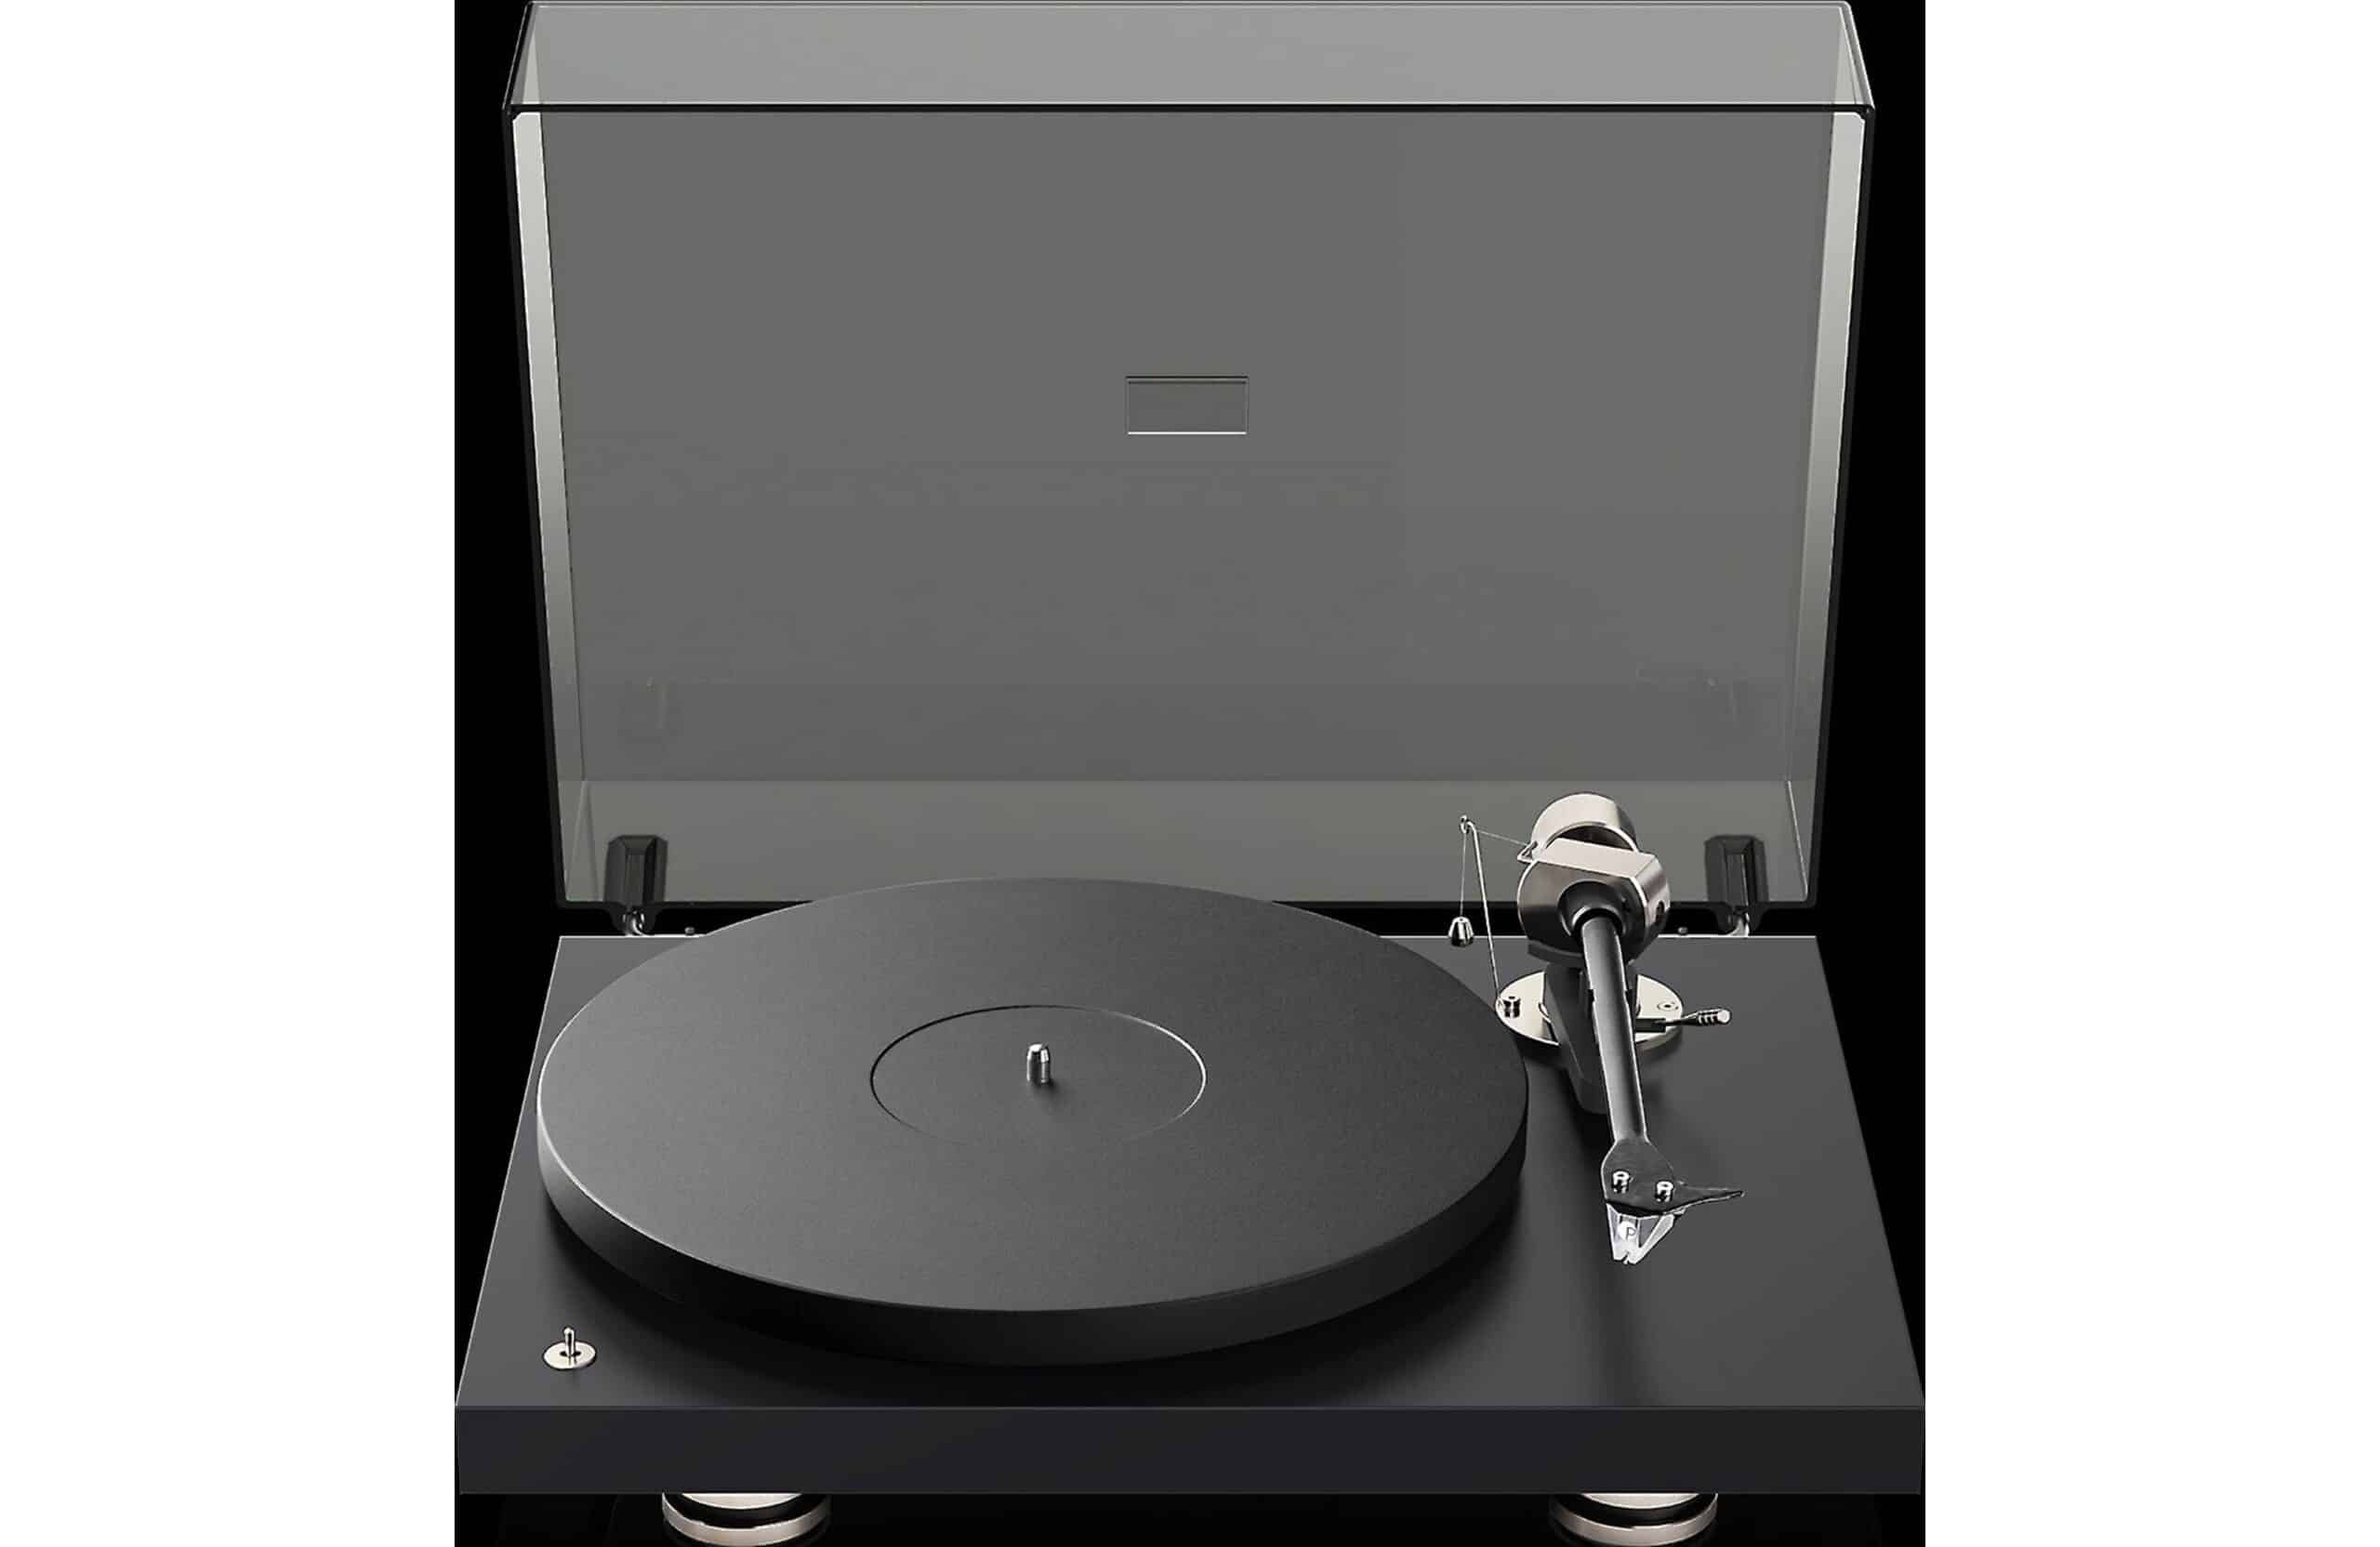 Pro-Ject releases Debut Pro turntable to celebrate 30th anniversary